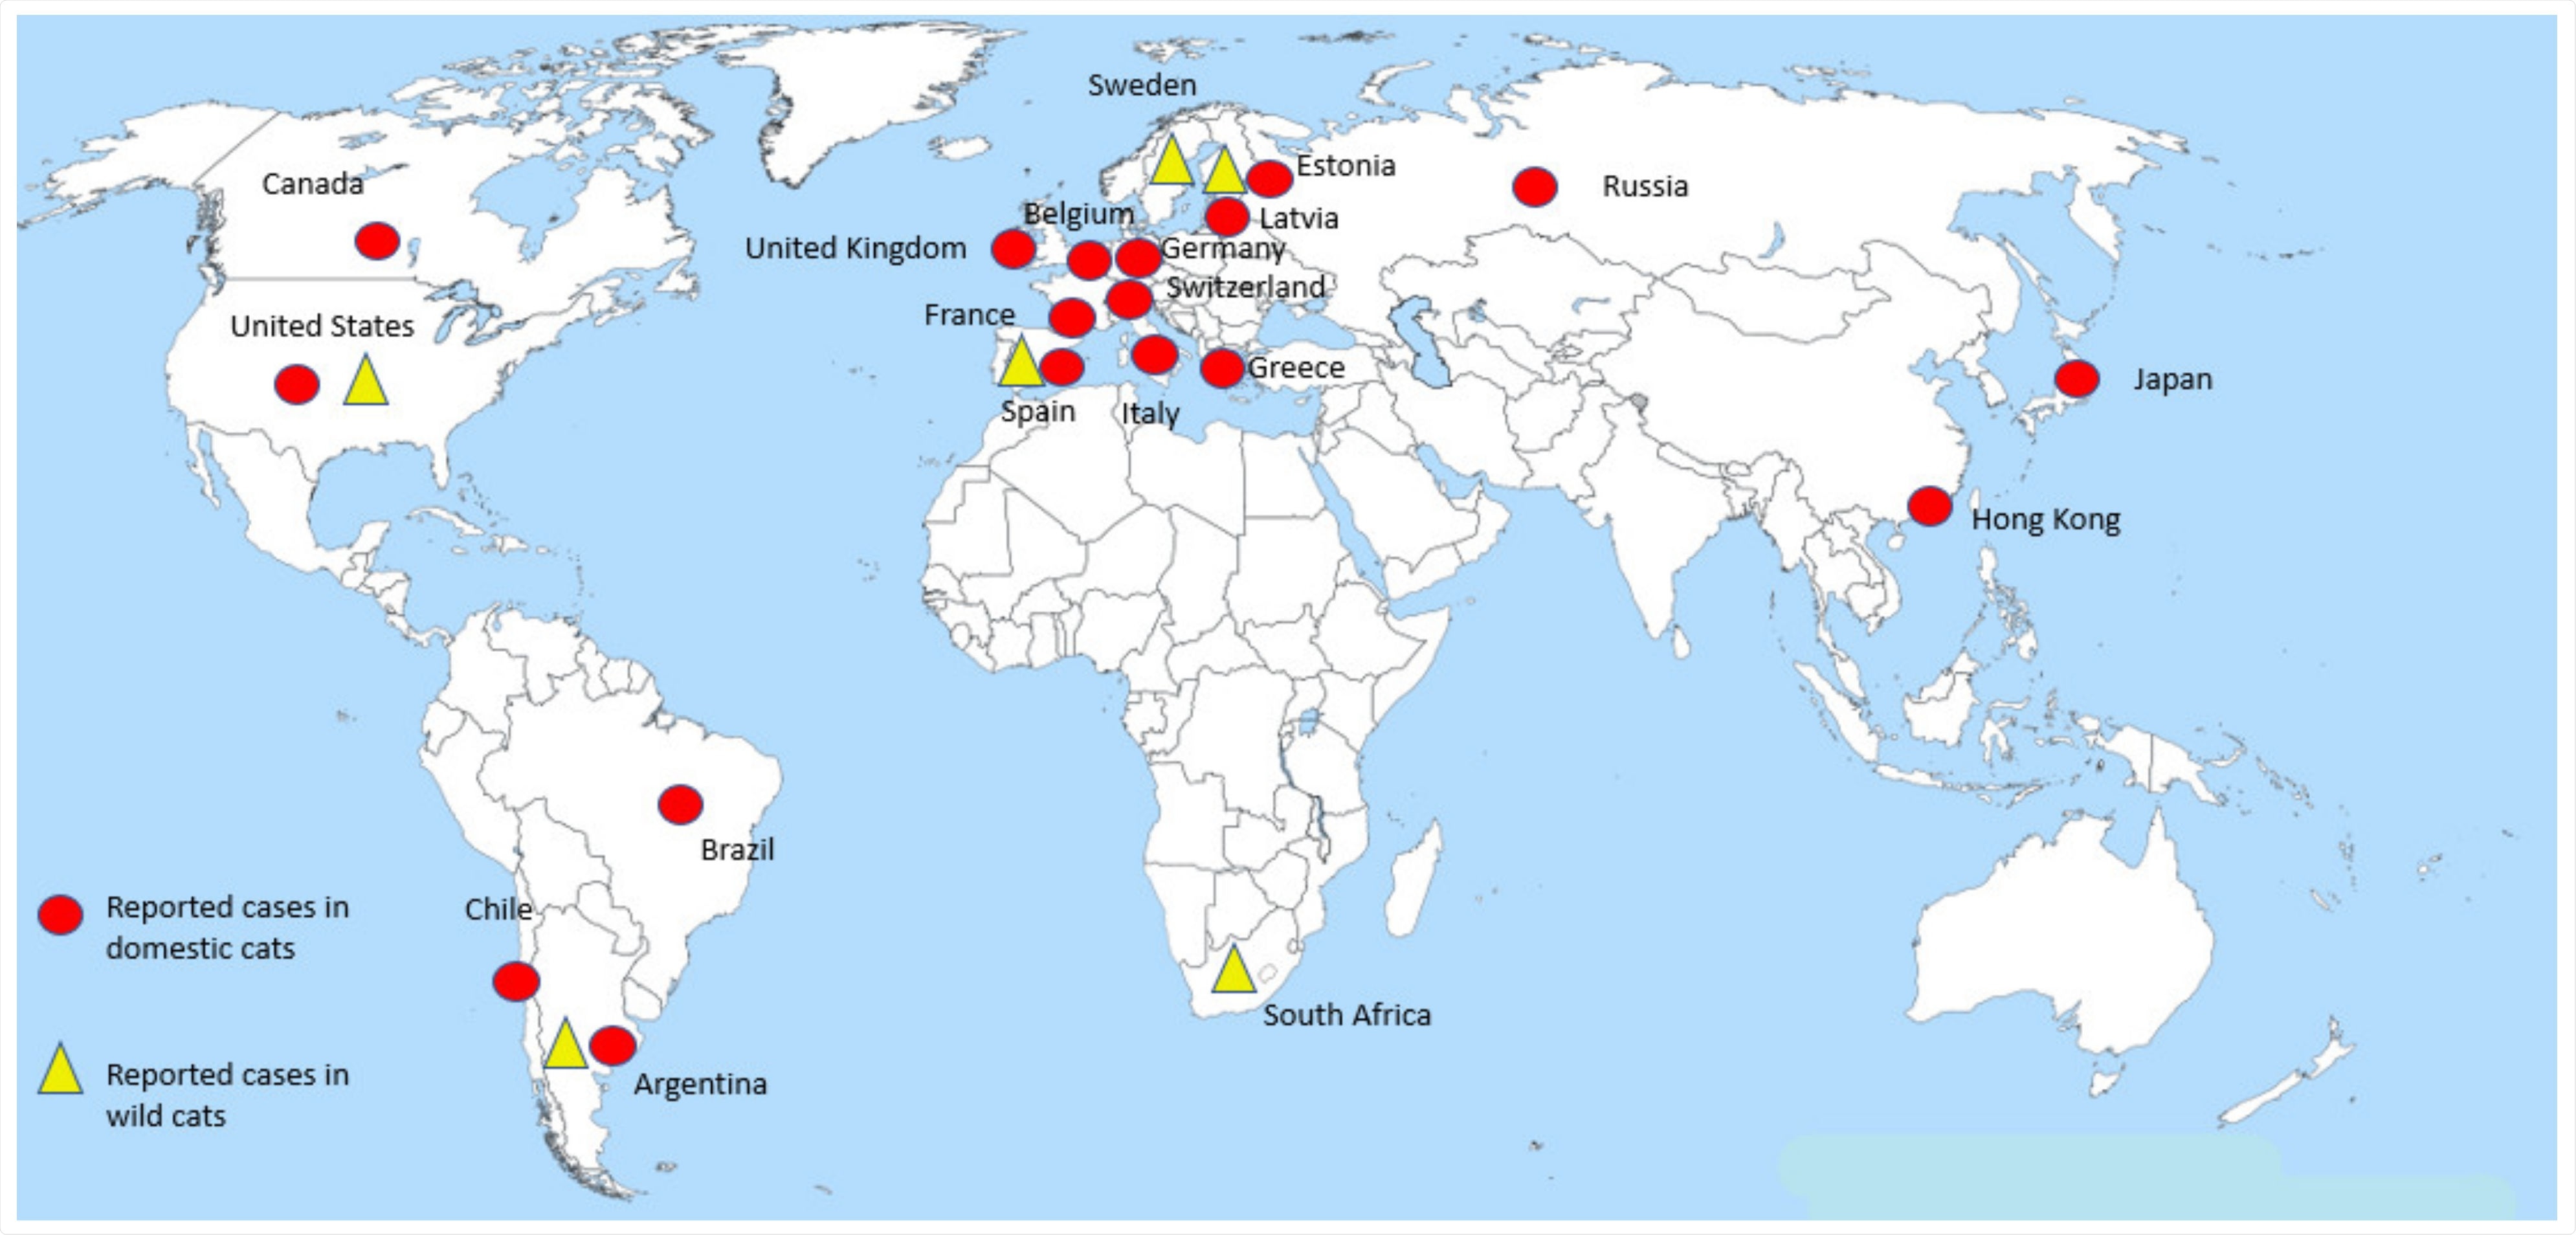 Distribution of cases of SARS-CoV-2 reported in domestic and wild cats worldwide. Red circles denote cases in domestic cats reported by country. The virus has been detected in at least three different continents (the Americas, Europe and Asia) in these animals. Yellow triangles denote cases in captive wild felines which have been reported in the Americas, Europe and Africa.